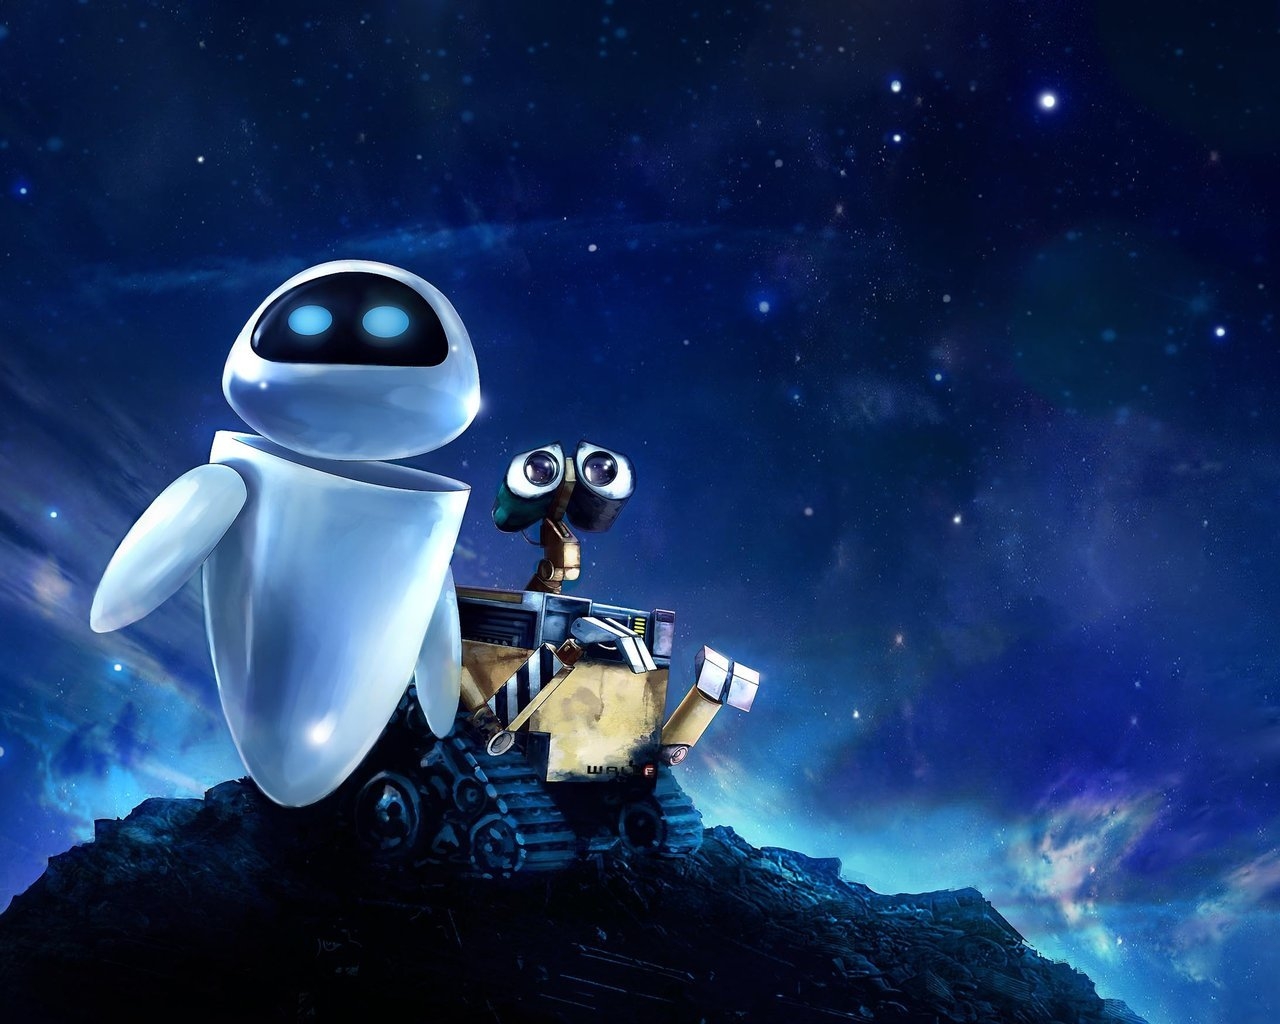 Walle Movie for 1280 x 1024 resolution